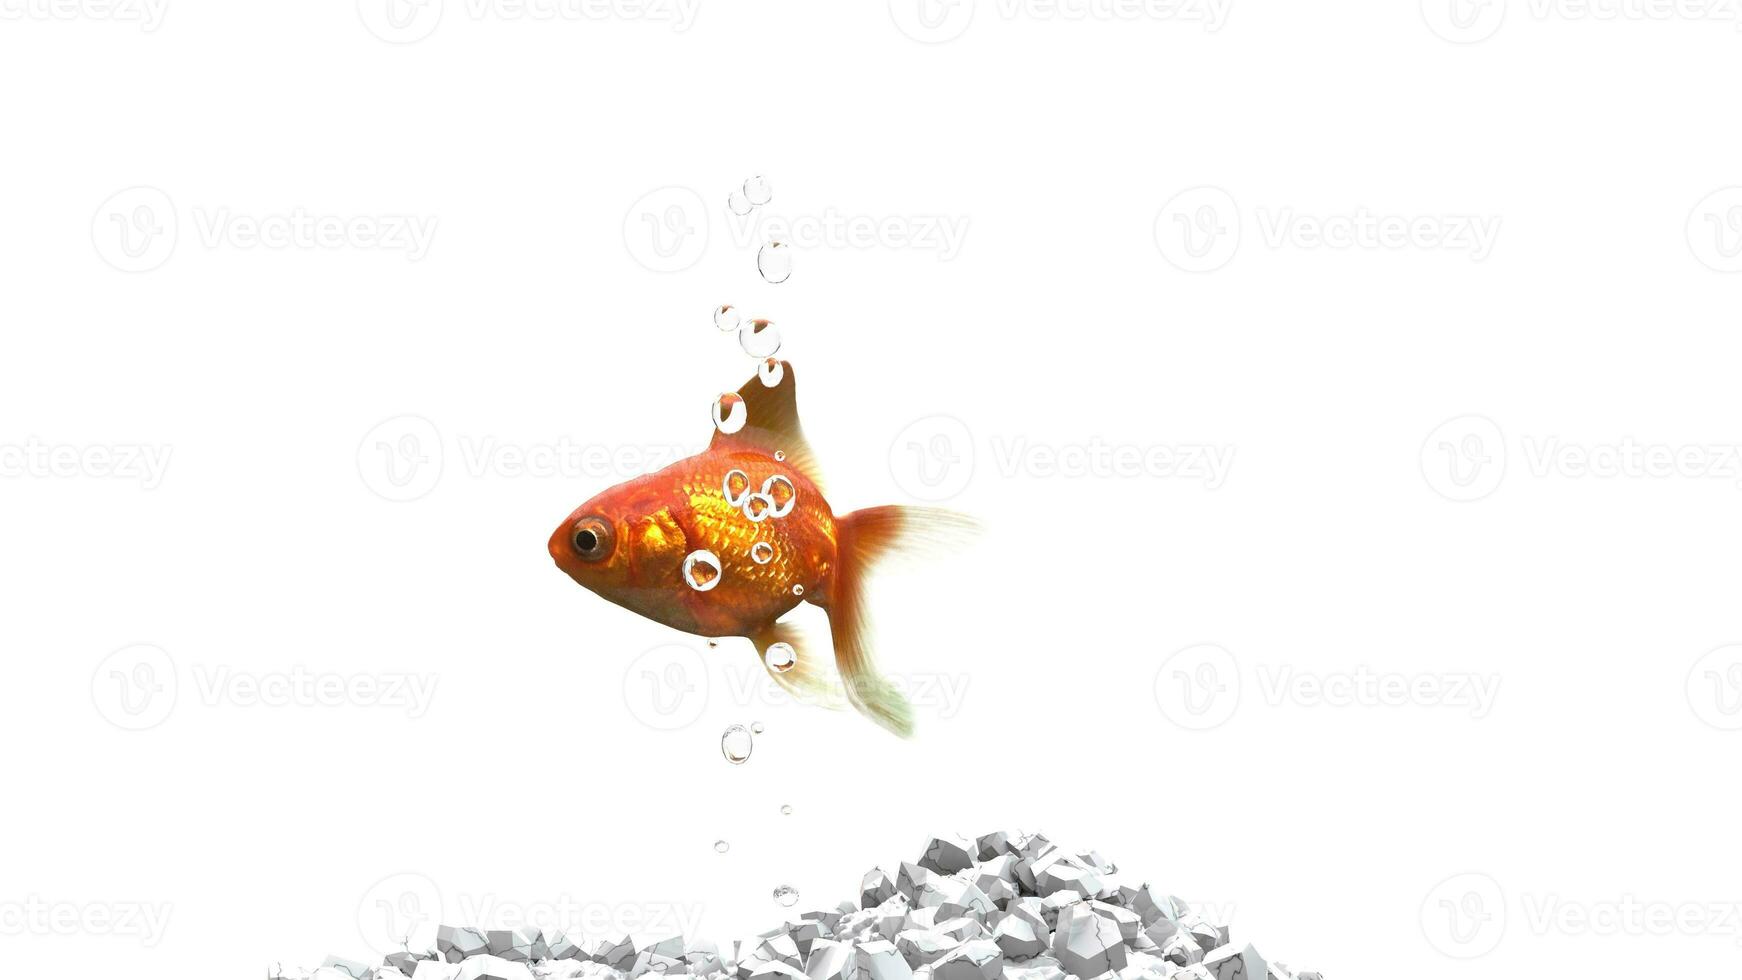 Gold fish - white pebbles - air bubbles - isolated on white background photo